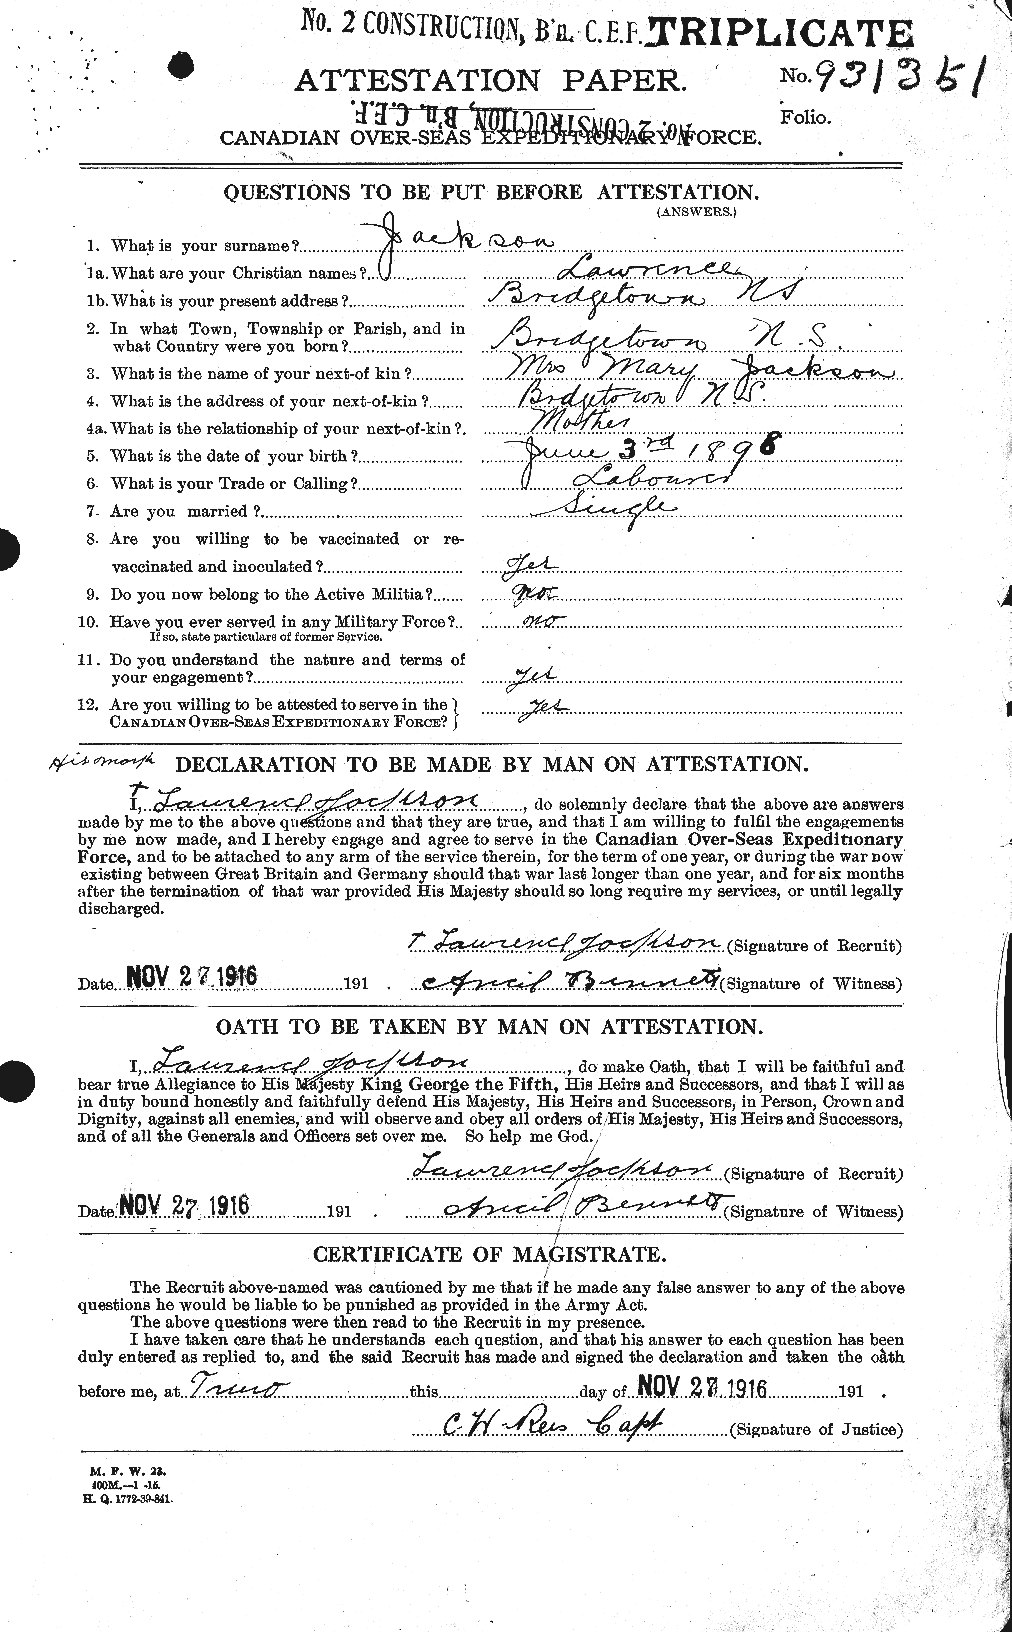 Personnel Records of the First World War - CEF 414386a